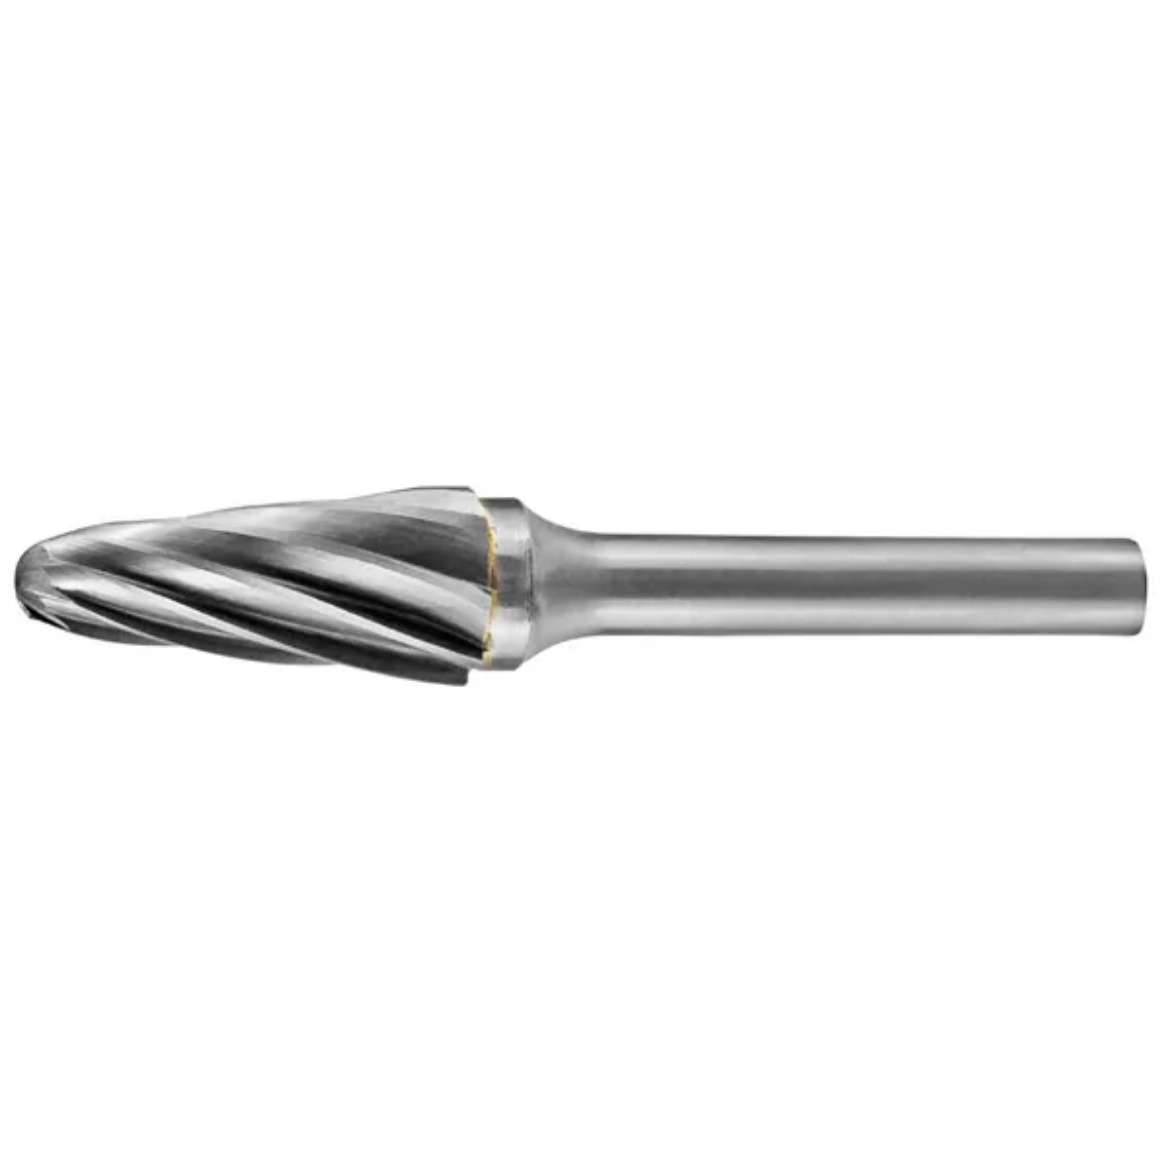 Picture of HOLEMAKER CARBIDE BURR, TAPERED RADIUS END, 1/2" X 1-1/8" HEAD, 1/4" SHANK AC